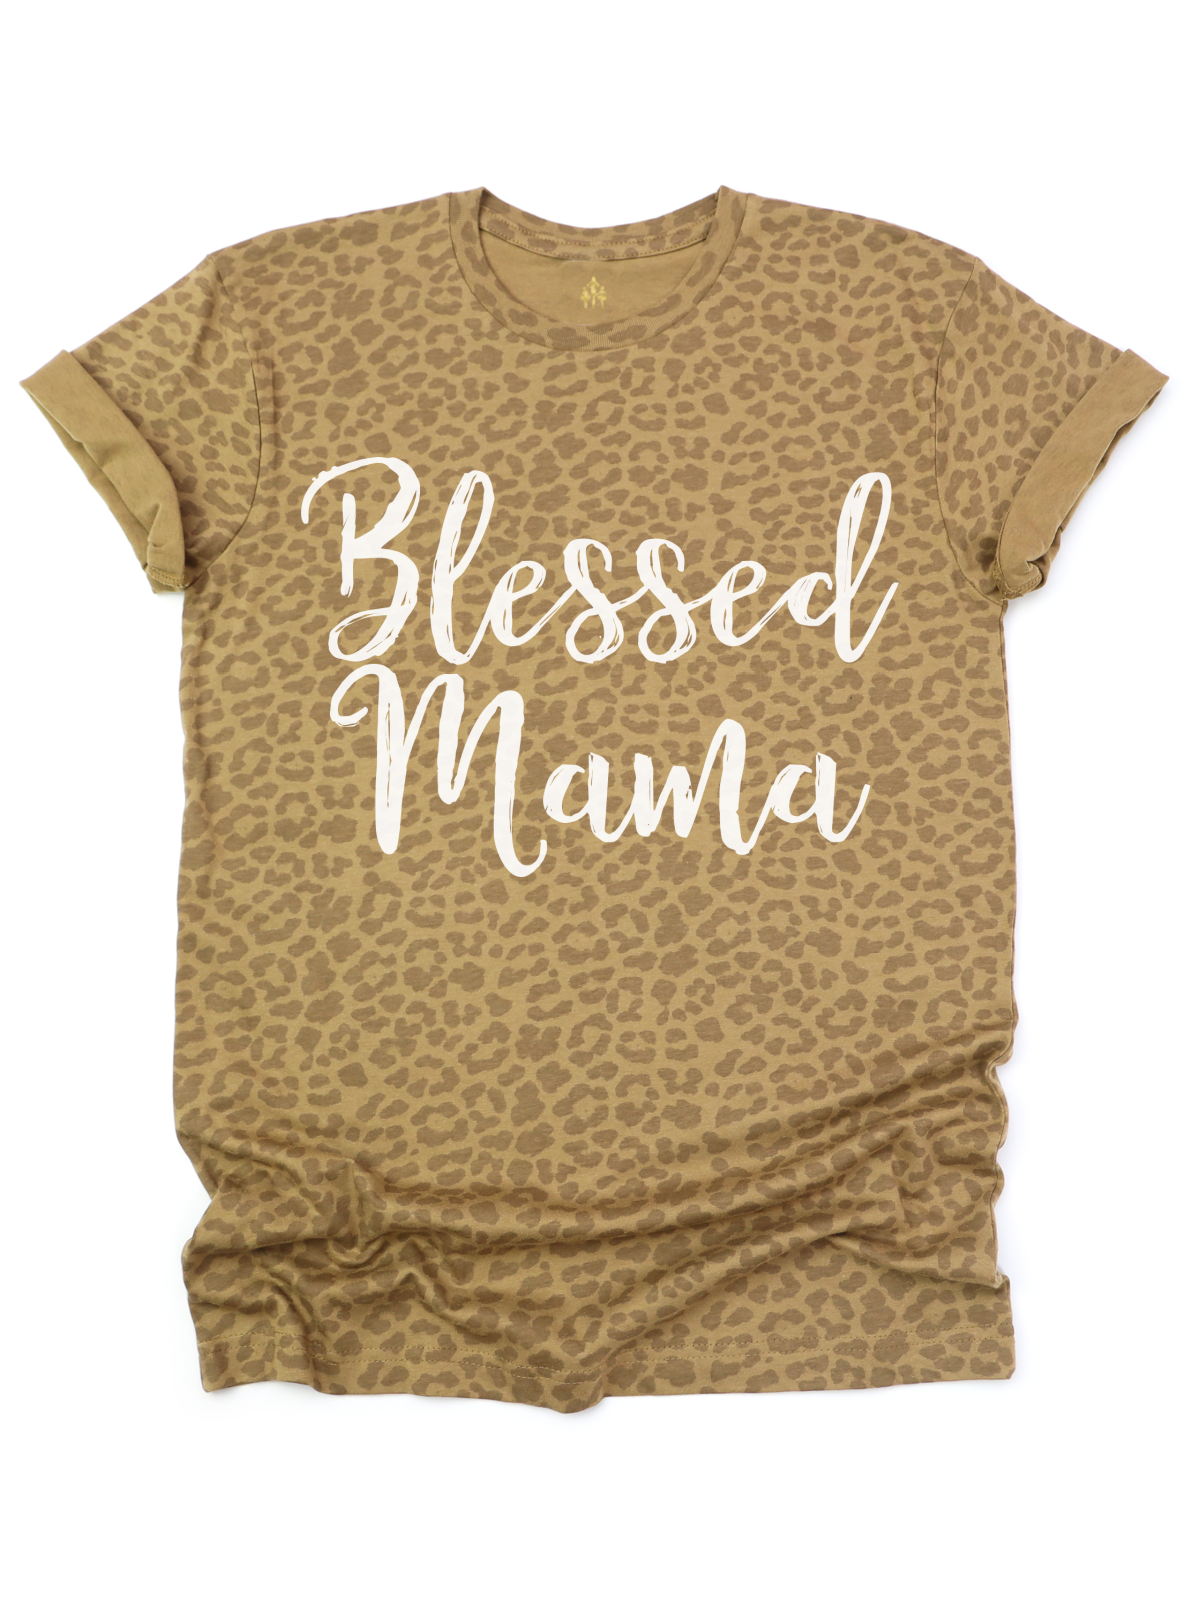 Blessed Mama Women's Natural Leopard Shirt